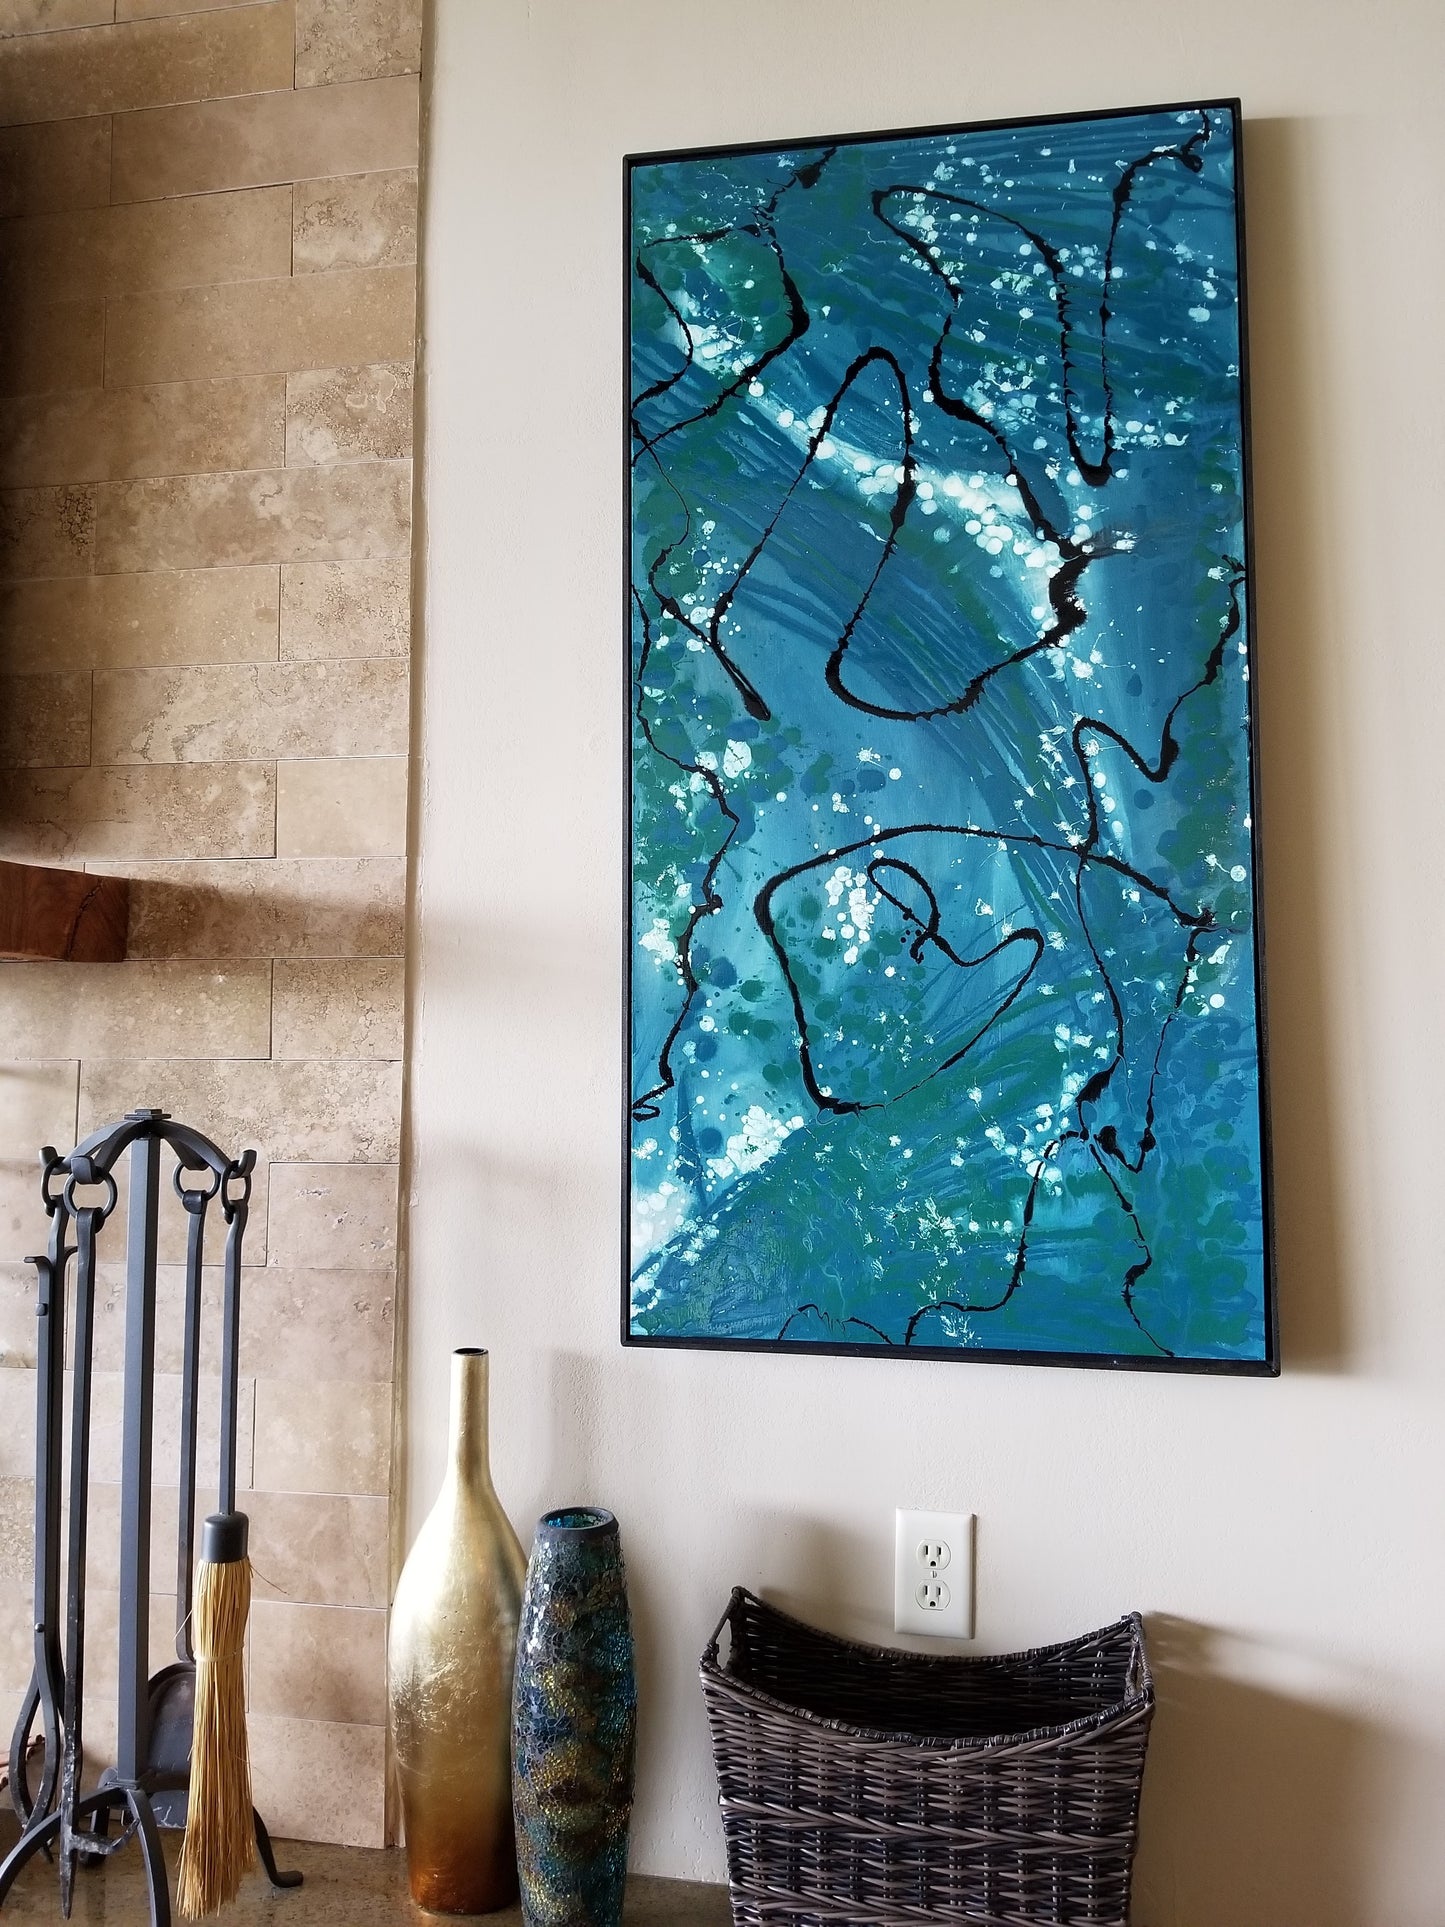 Prosaic Winter - Original Abstract Painting in Austin Texas 24" x 48"